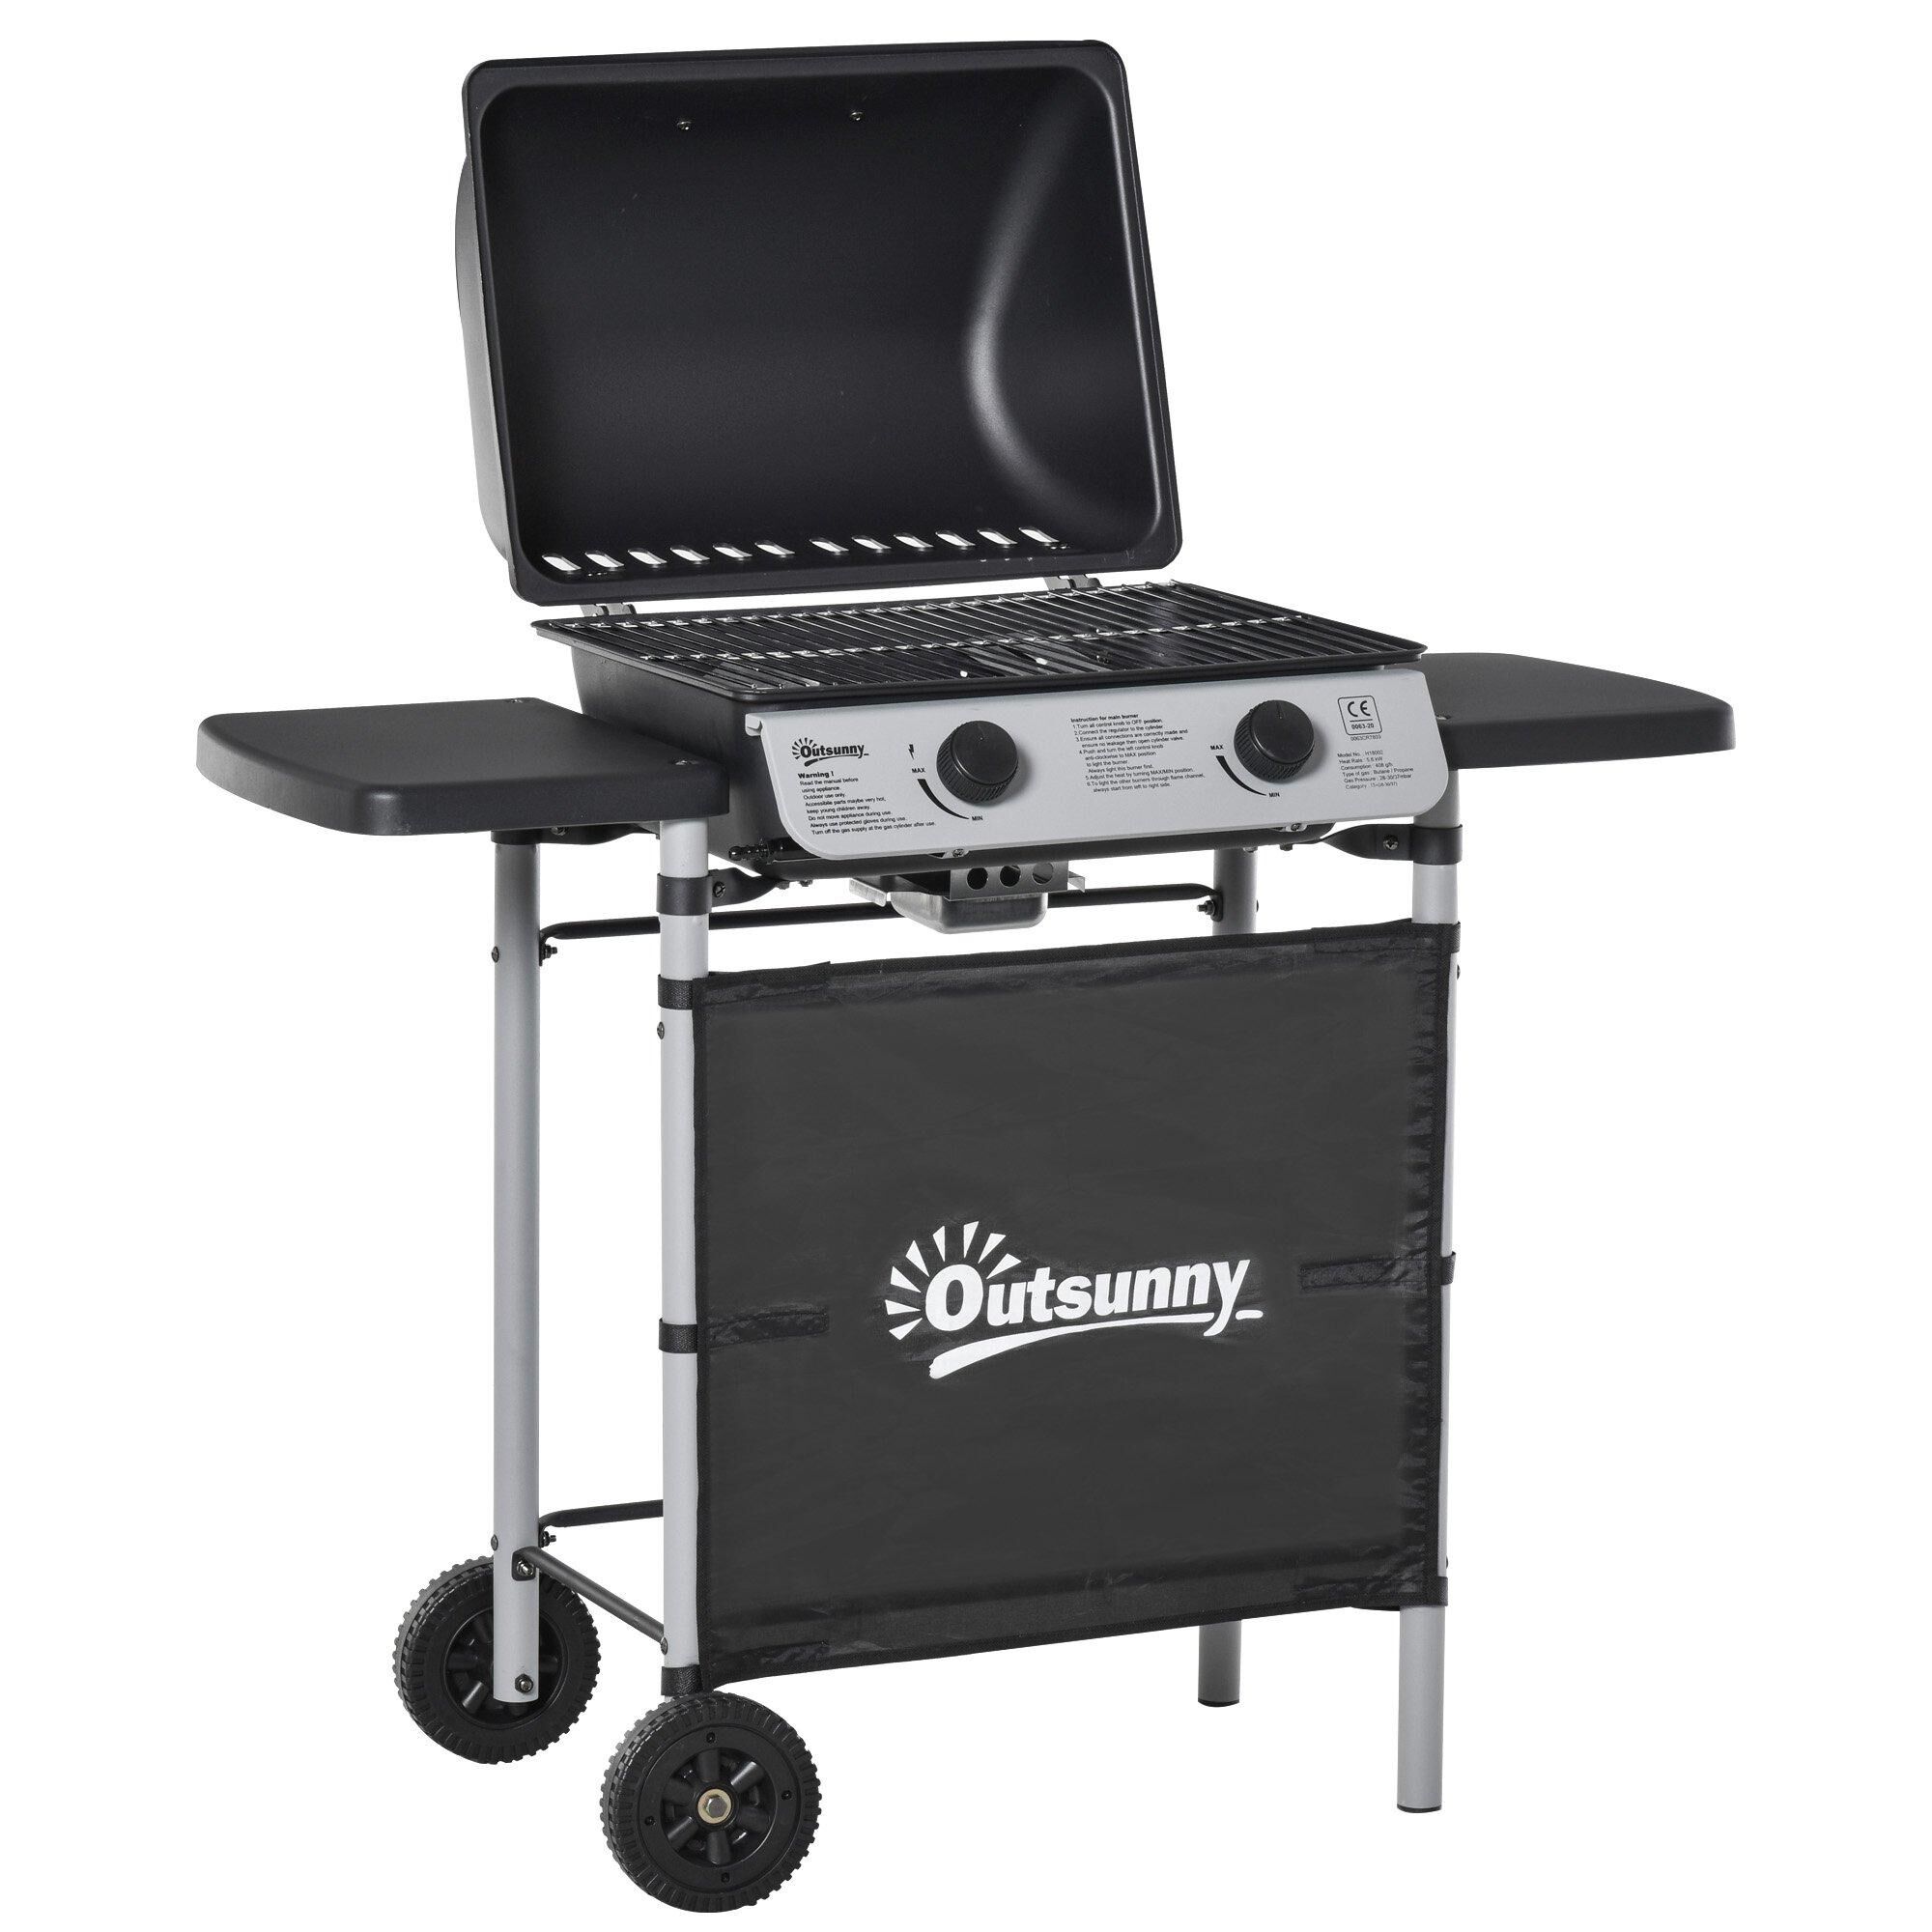 Outsunny Propane Gas Barbecue Grill 2 Burner Cooking BBQ 5.6 kW with Shelves